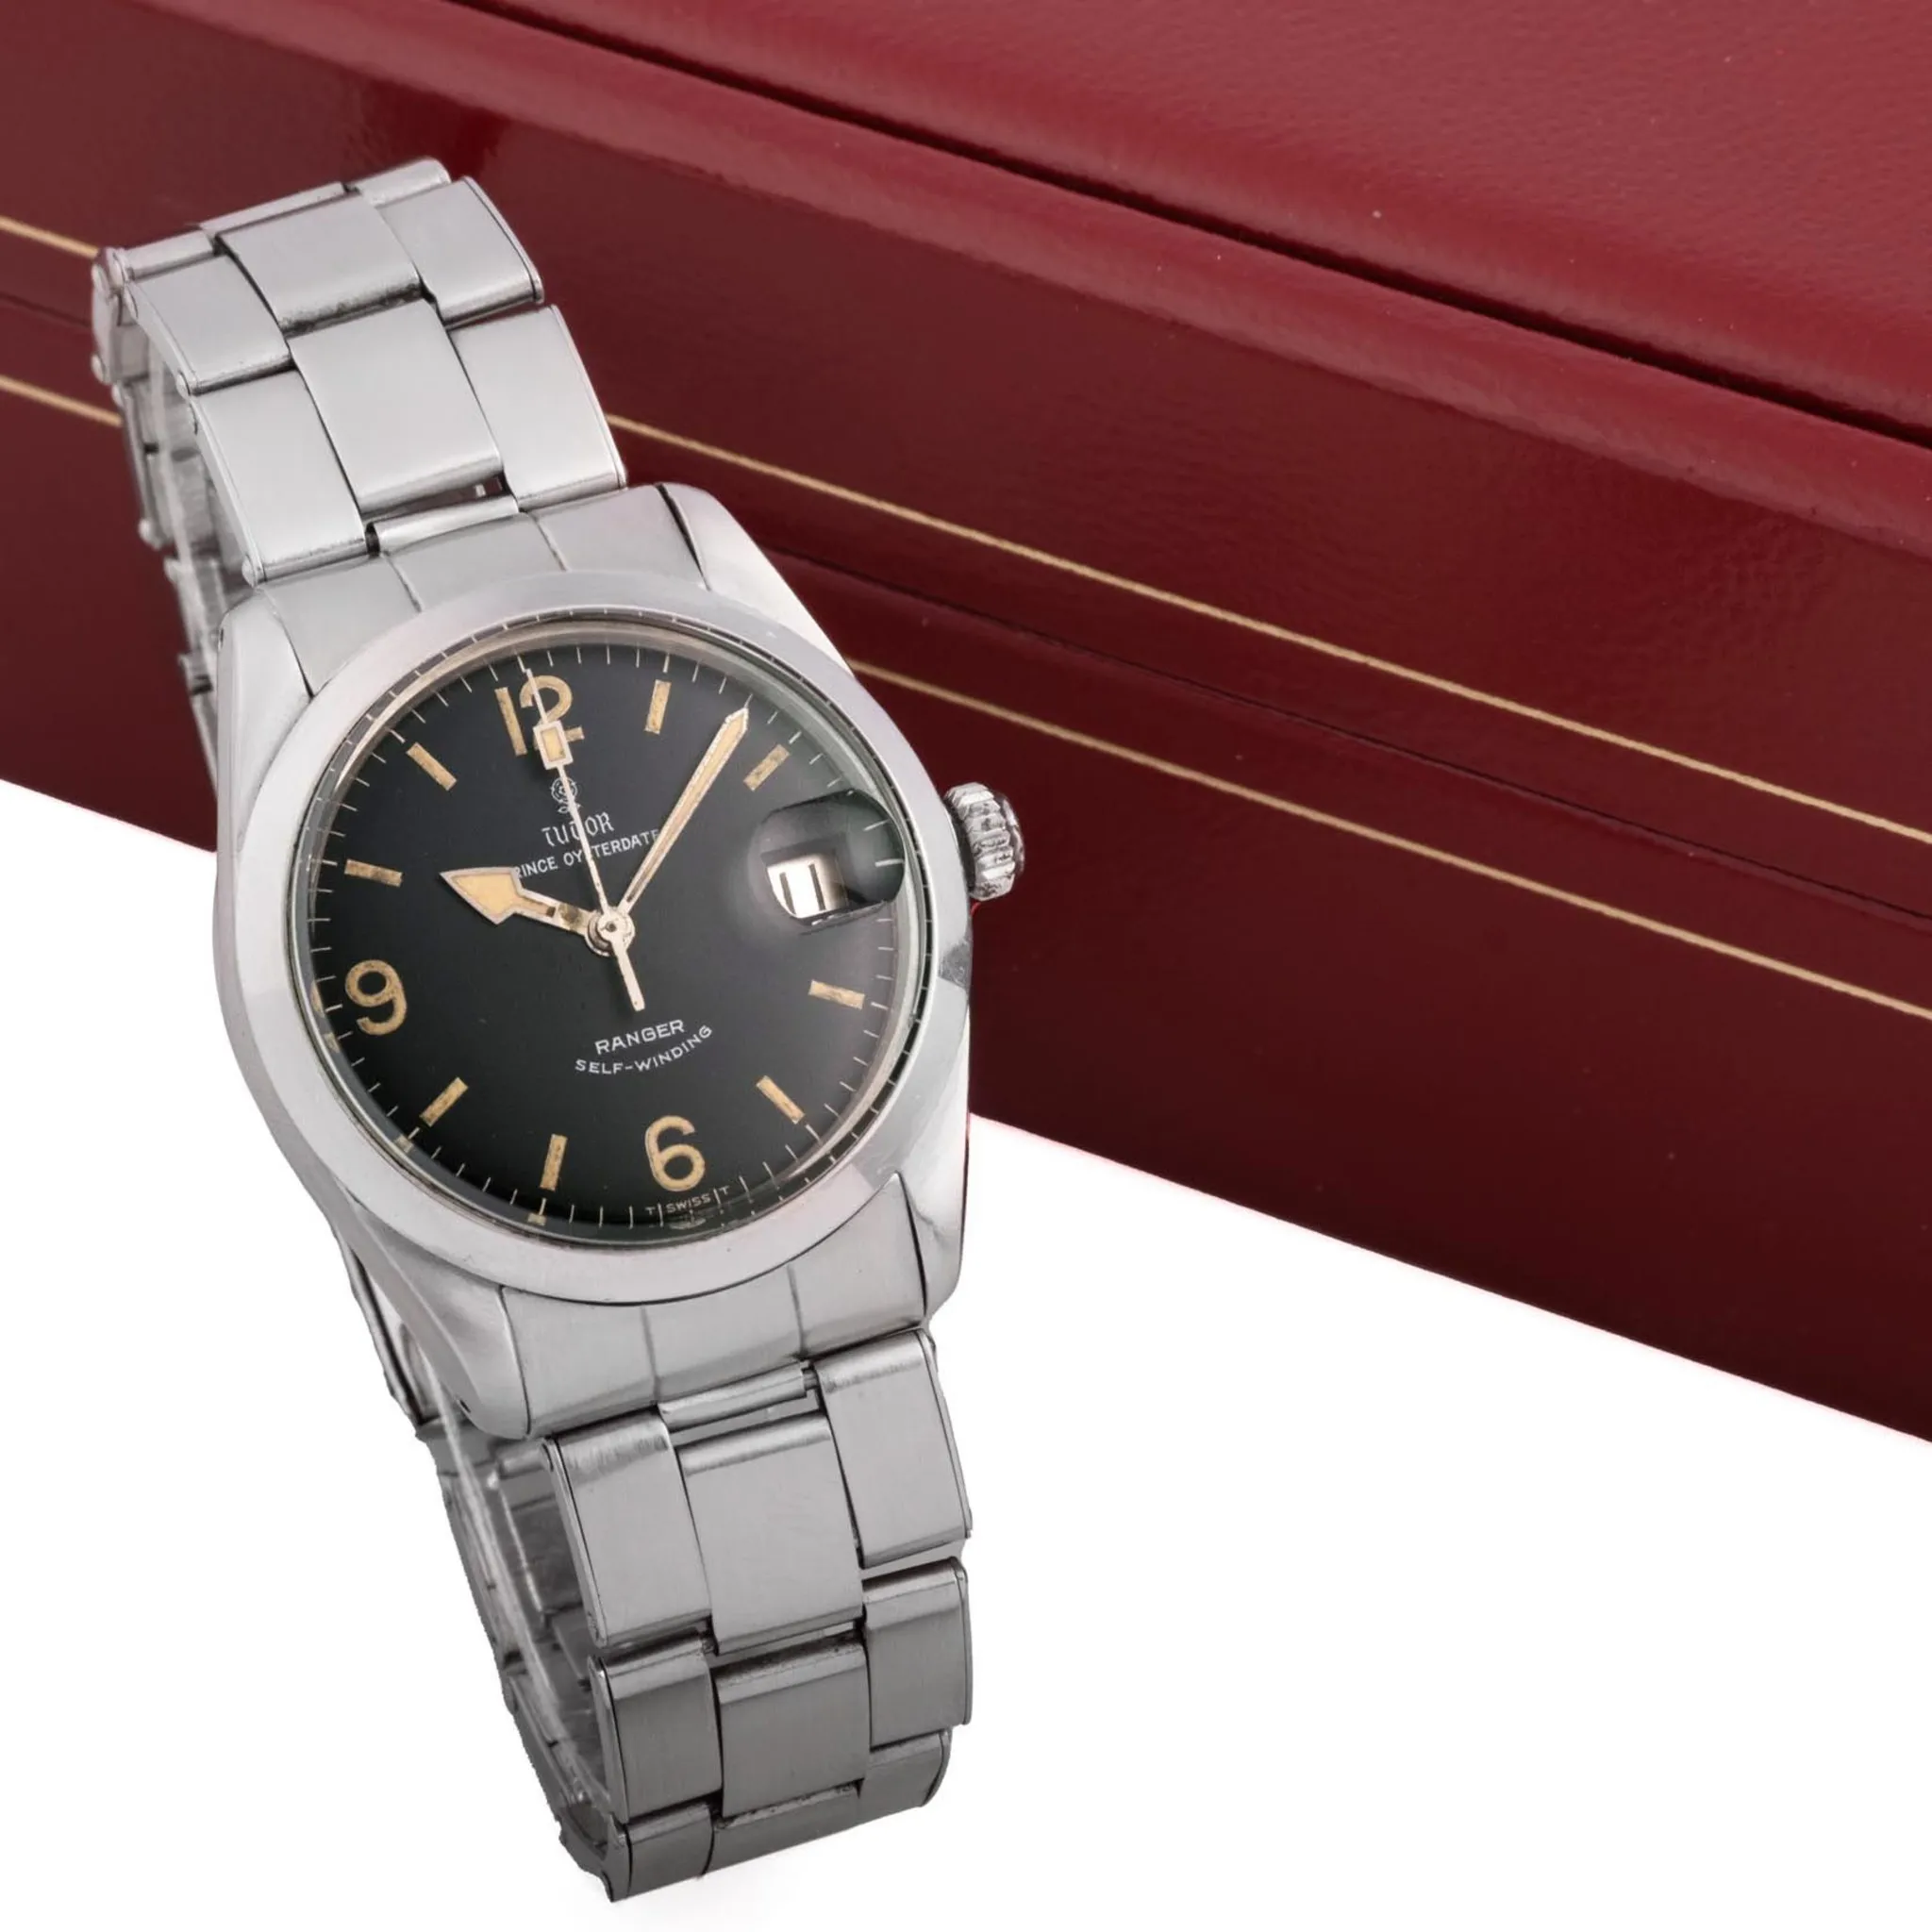 Tudor Prince Oysterdate 7996 34mm Stainless steel